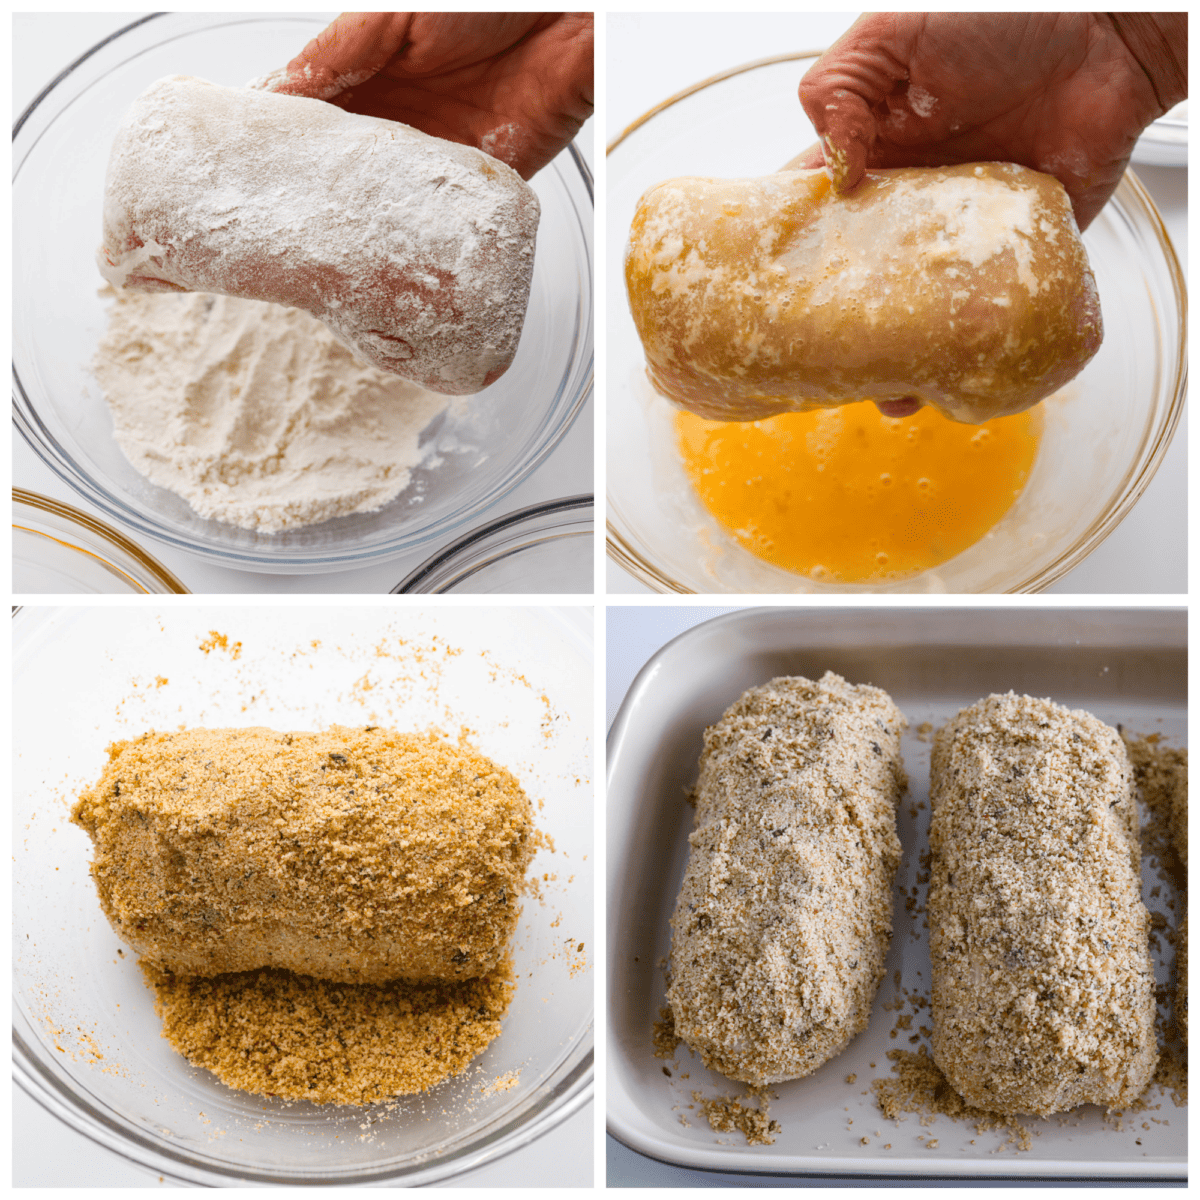 First photo of chicken rolled in the flour mixture. Second photo of the chicken rolled in butter. Third photo of chicken rolled in the breadcrumb mixture. Forth photo of the chicken placed in a baking dish.